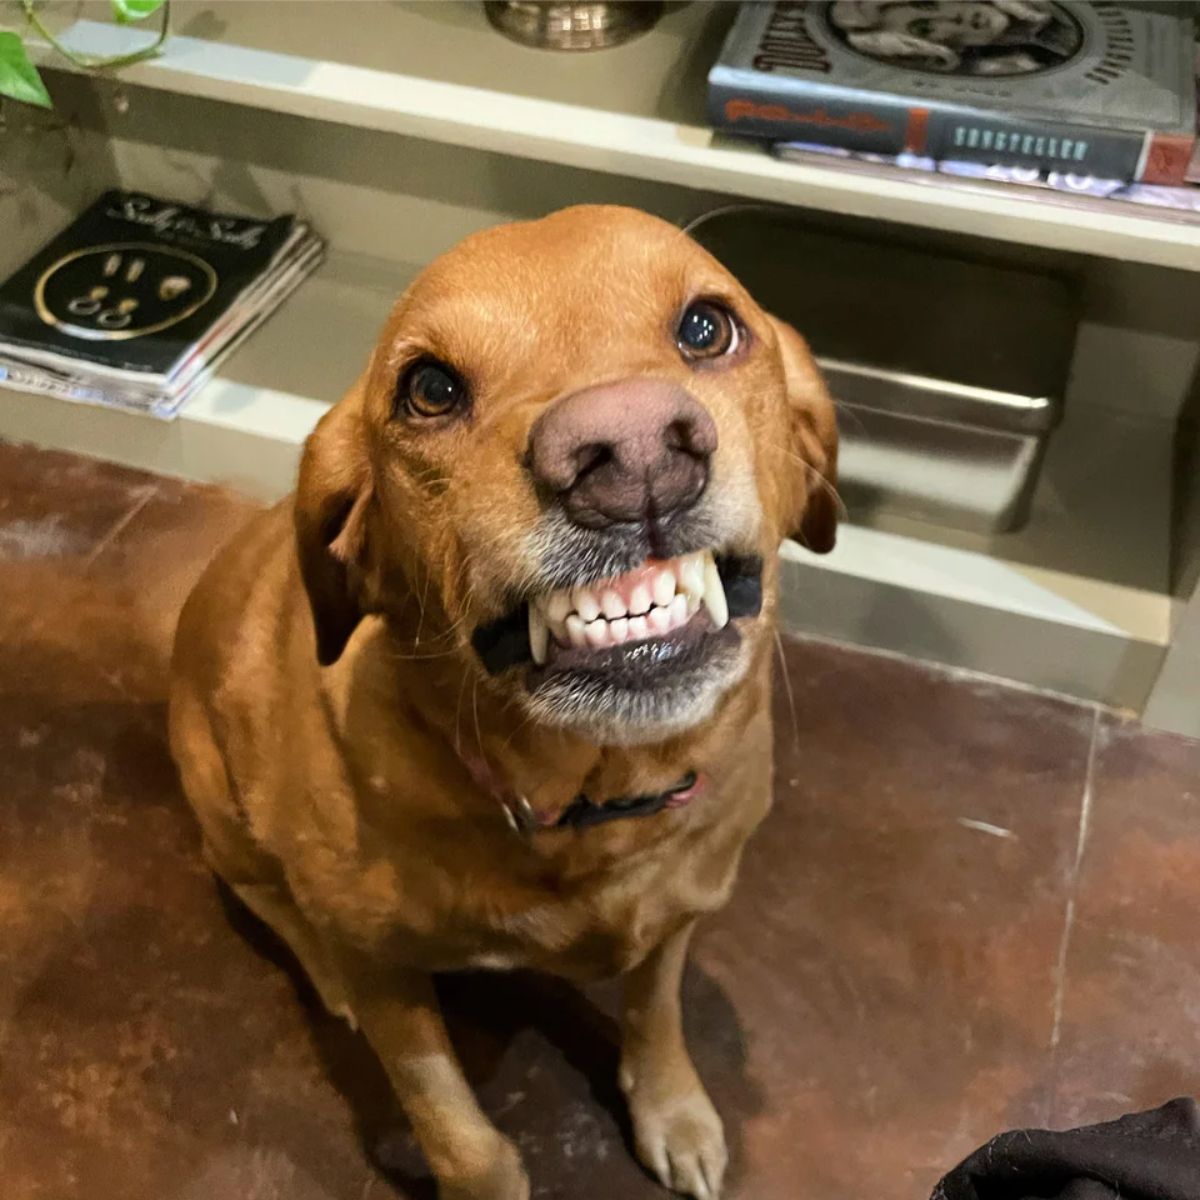 brown dog smiling with the teeth showing like a snarl